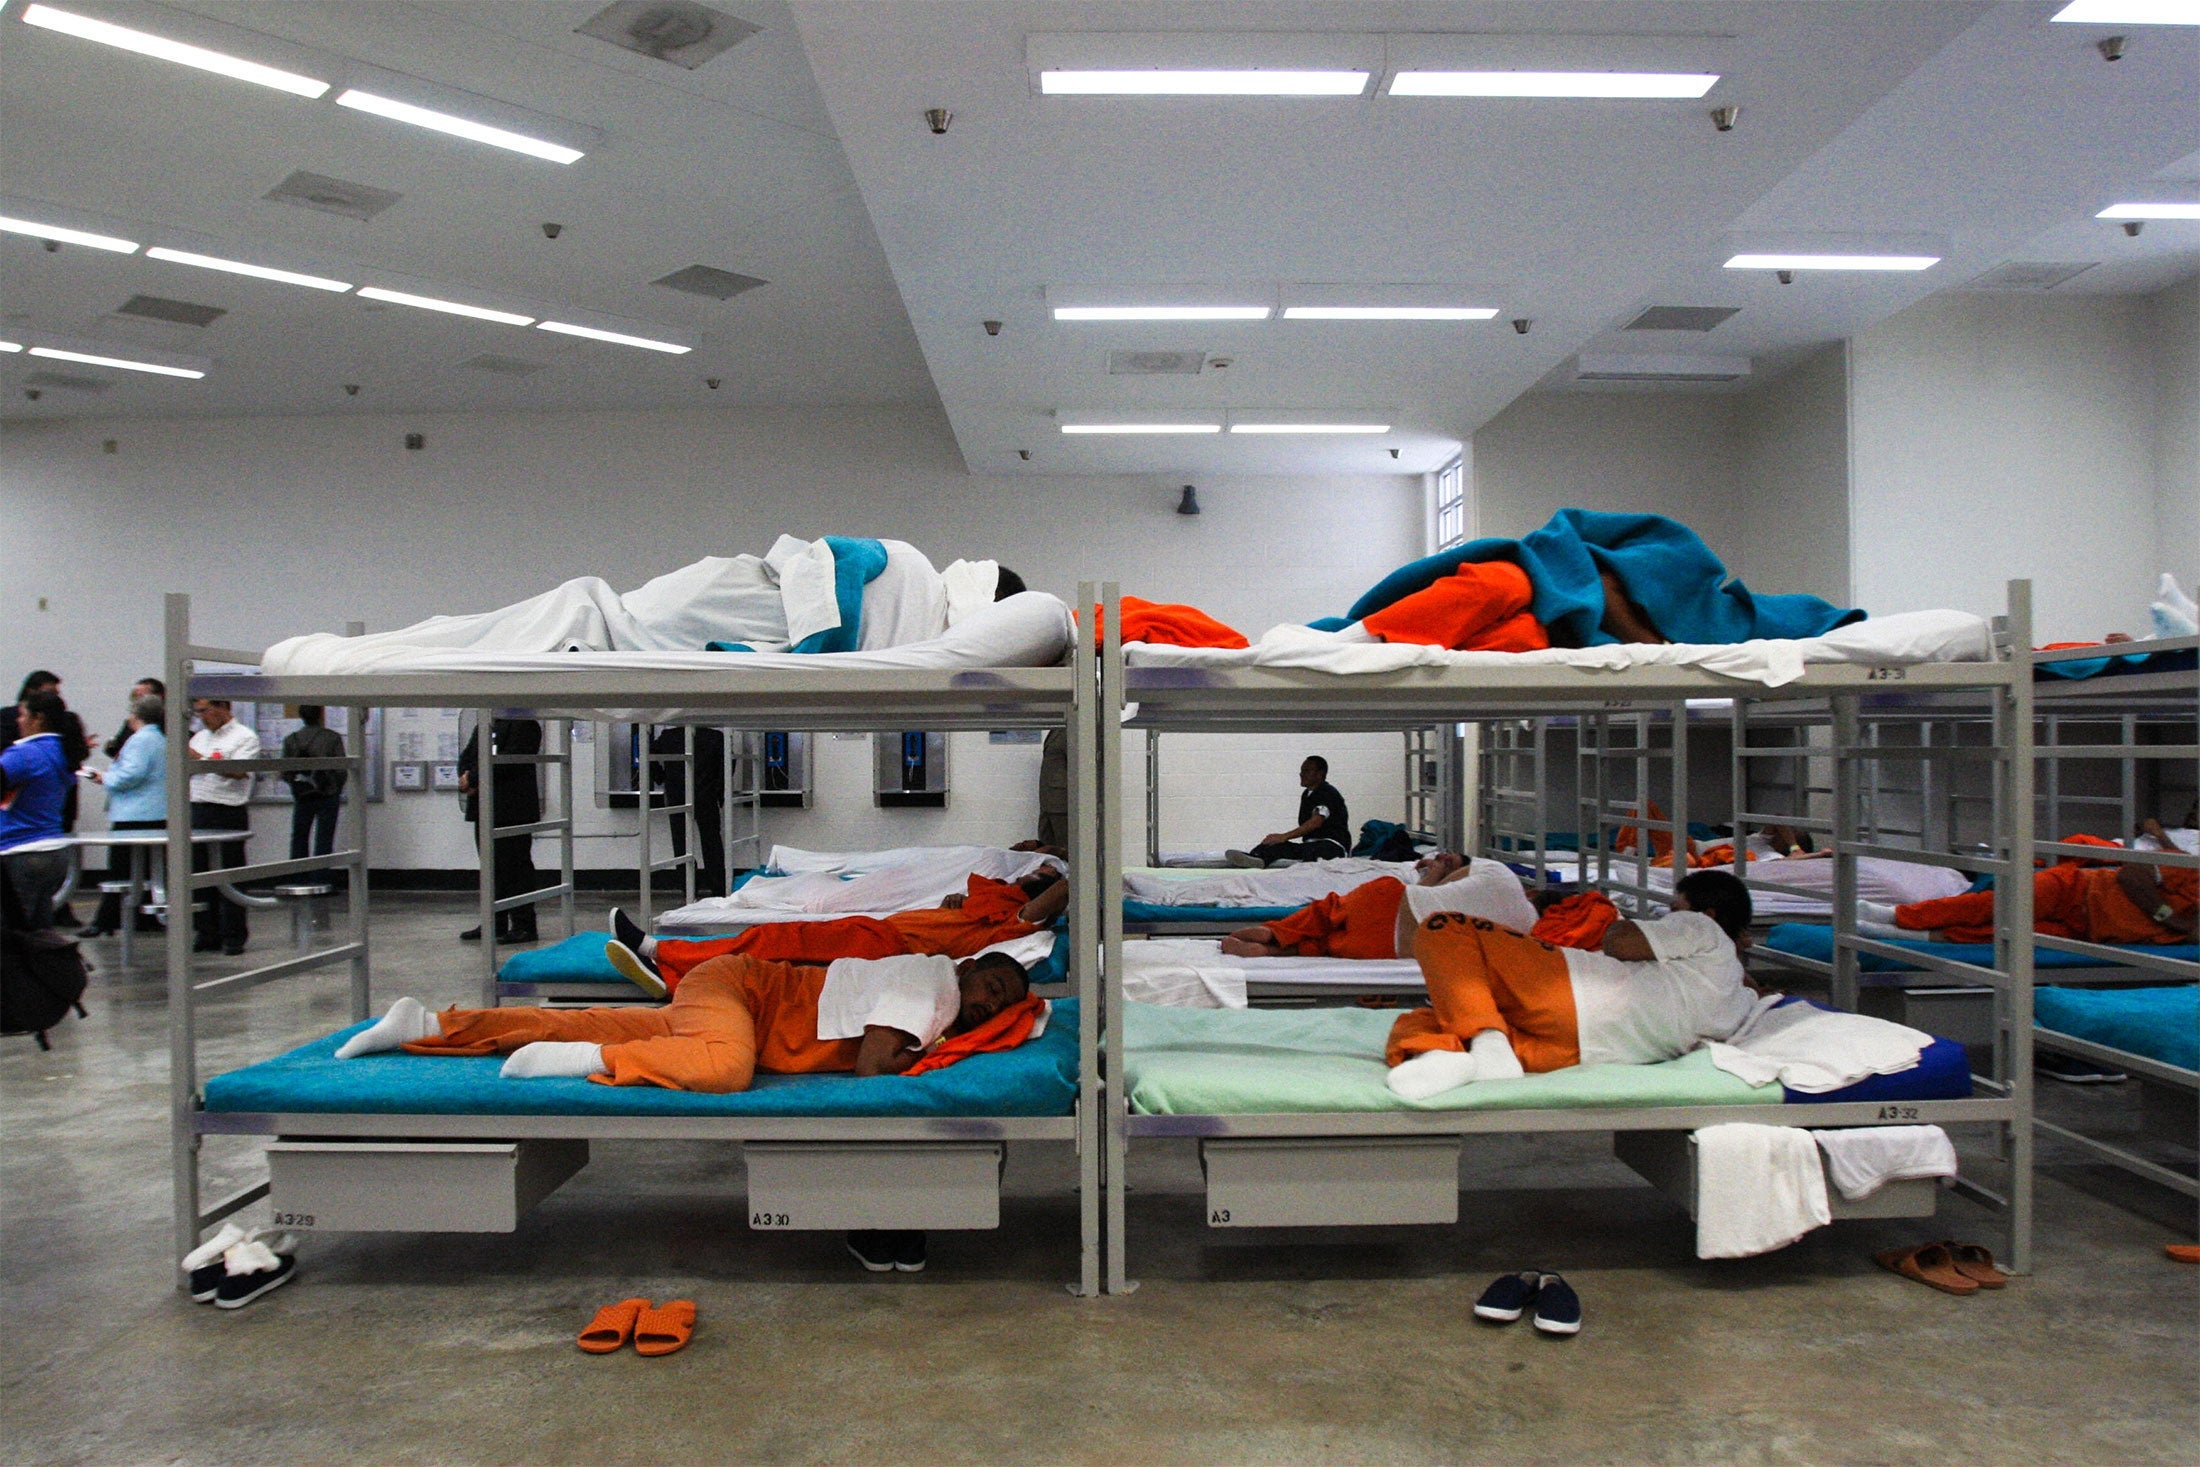 Male detainees sleep on their bunks in the dormitory of the Alpha Unit at Port Isabel detention facility in Texas, United States on December 17, 2008.